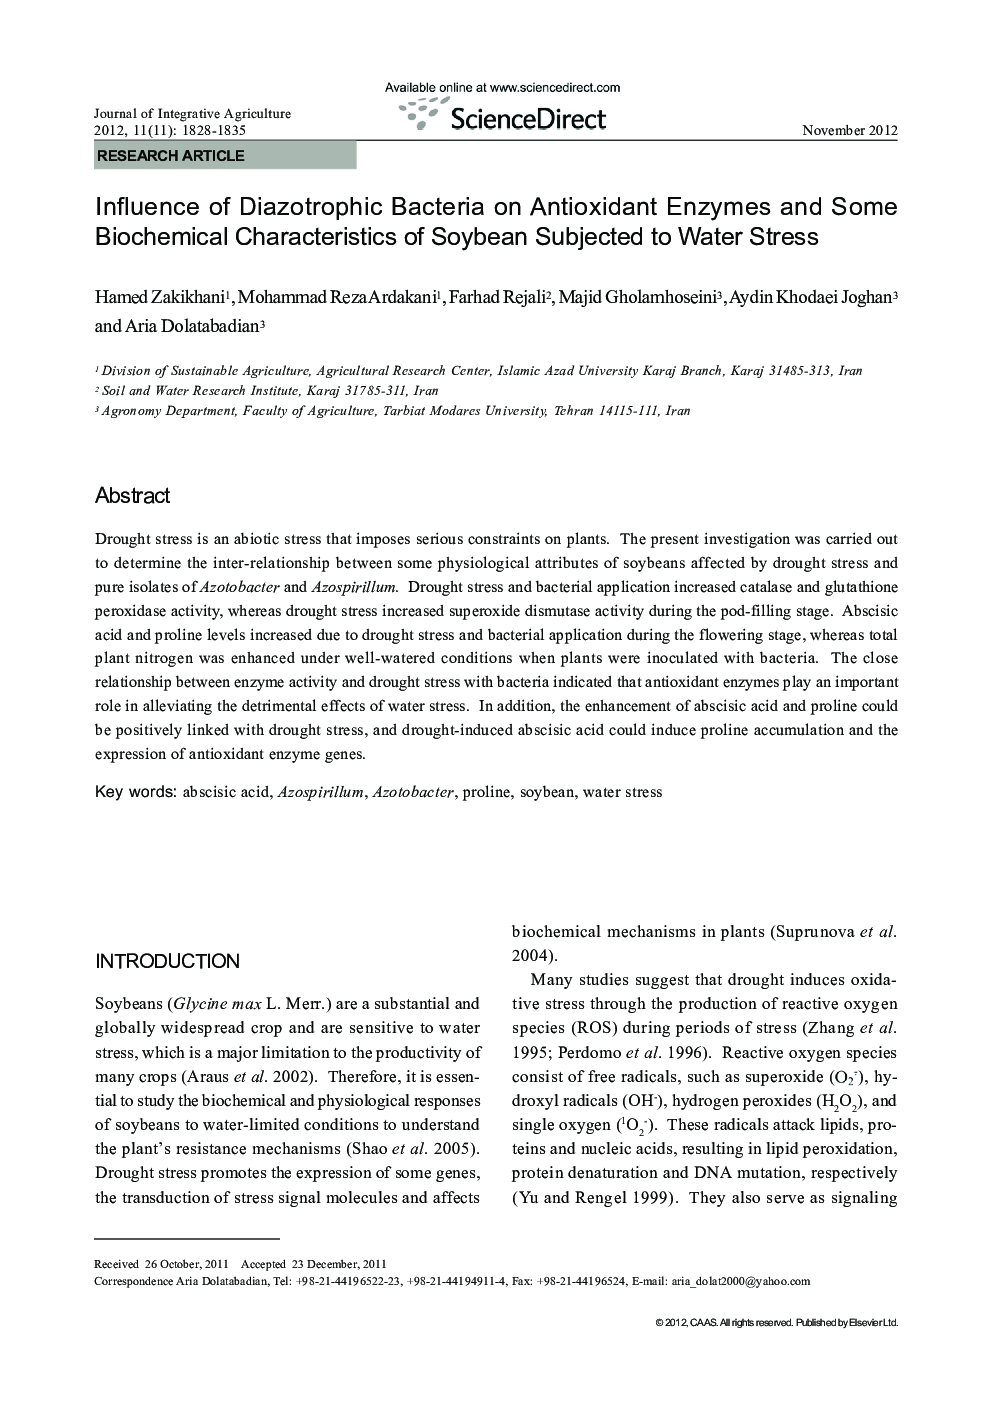 Influence of Diazotrophic Bacteria on Antioxidant Enzymes and Some Biochemical Characteristics of Soybean Subjected to Water Stress